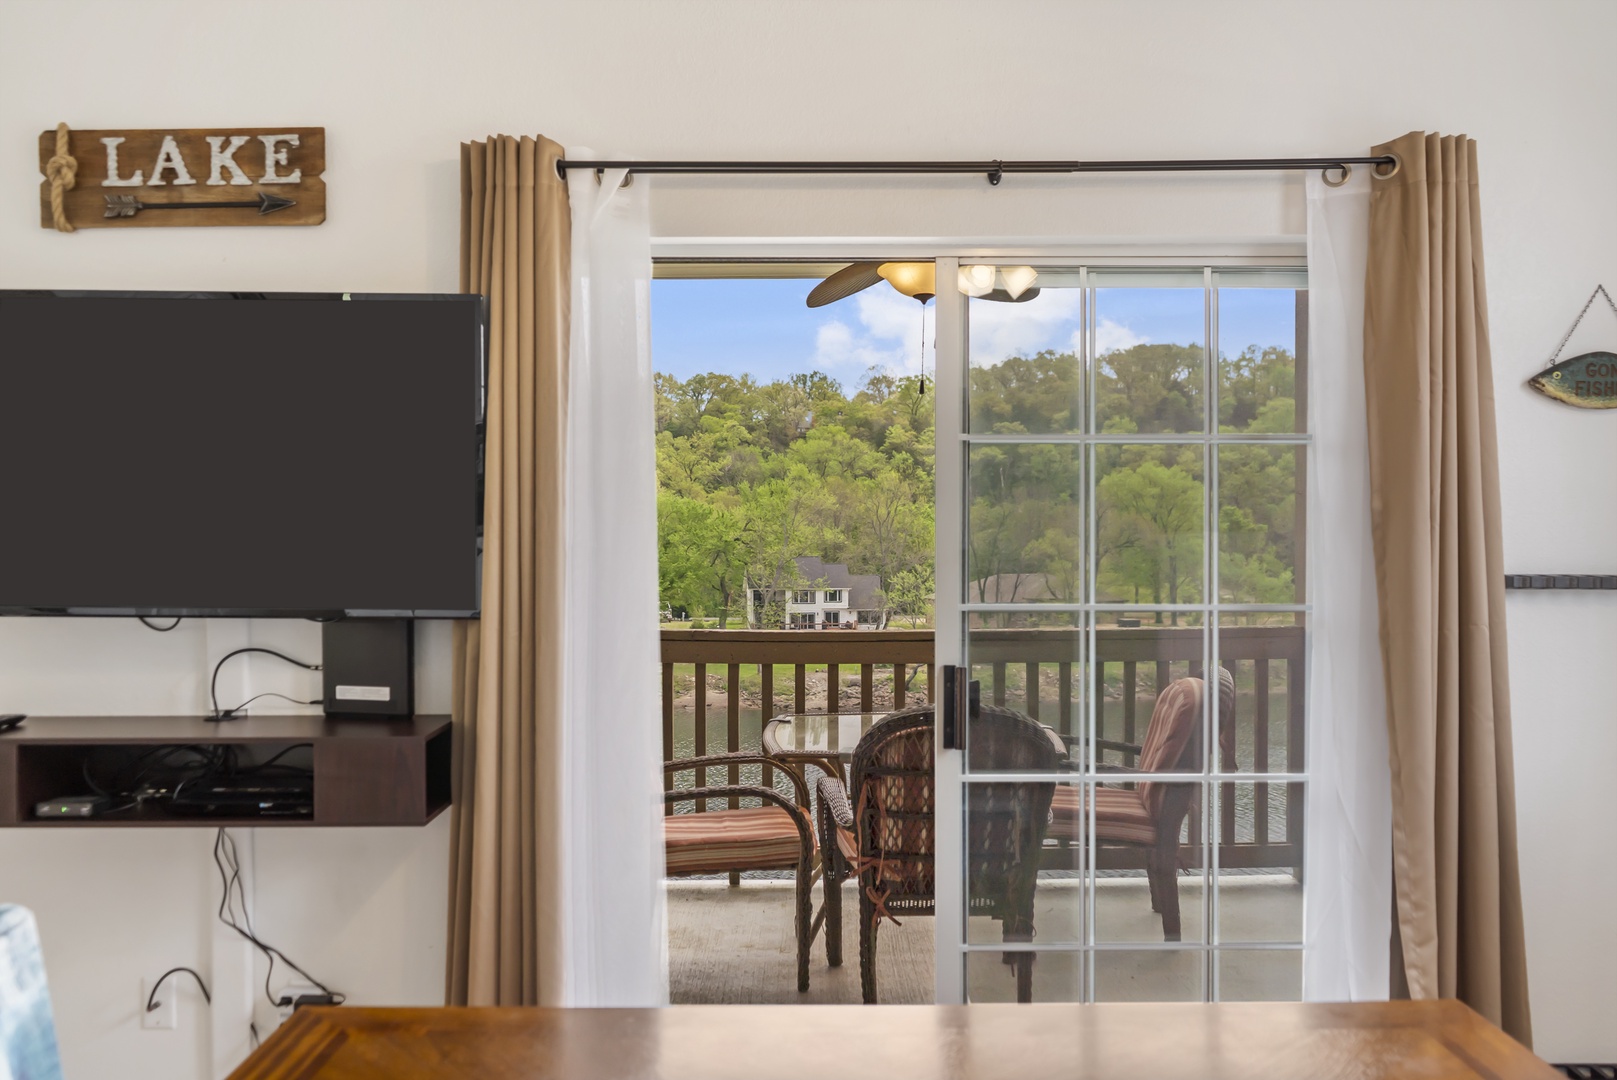 Step out onto the sunny balcony & take in the stunning view